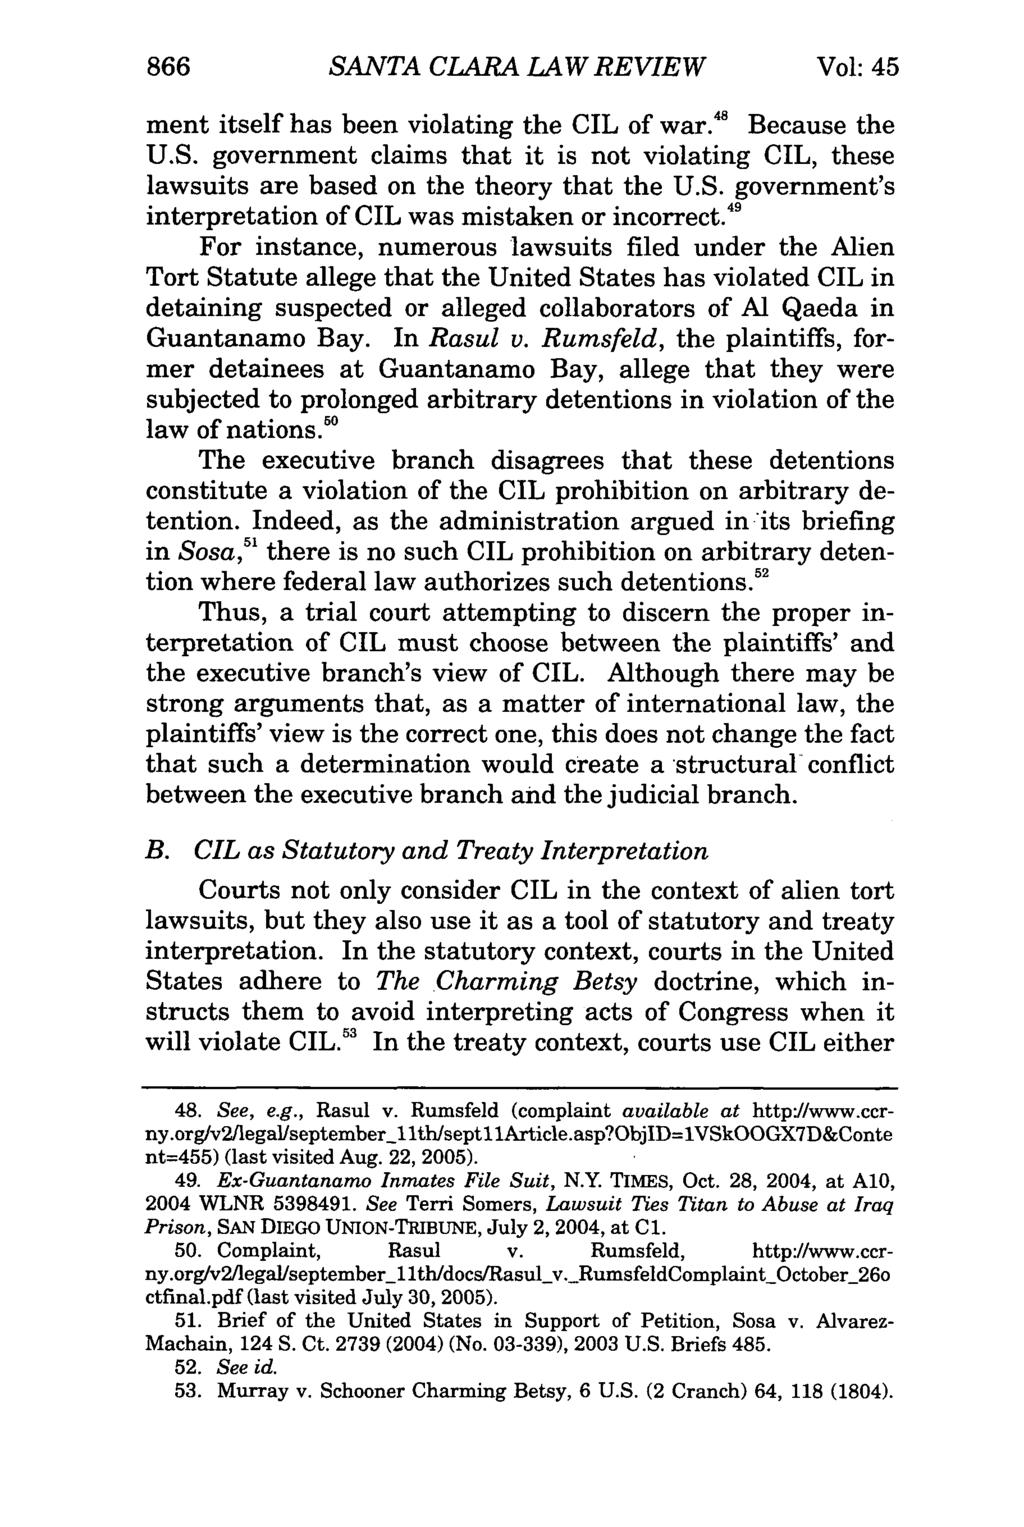 866 SANTA CLARA LAW REVIEW Vol: 45 ment itself has been violating the CIL of war." Because the U.S. government claims that it is not violating CIL, these lawsuits are based on the theory that the U.S. government's interpretation of CIL was mistaken or incorrect.